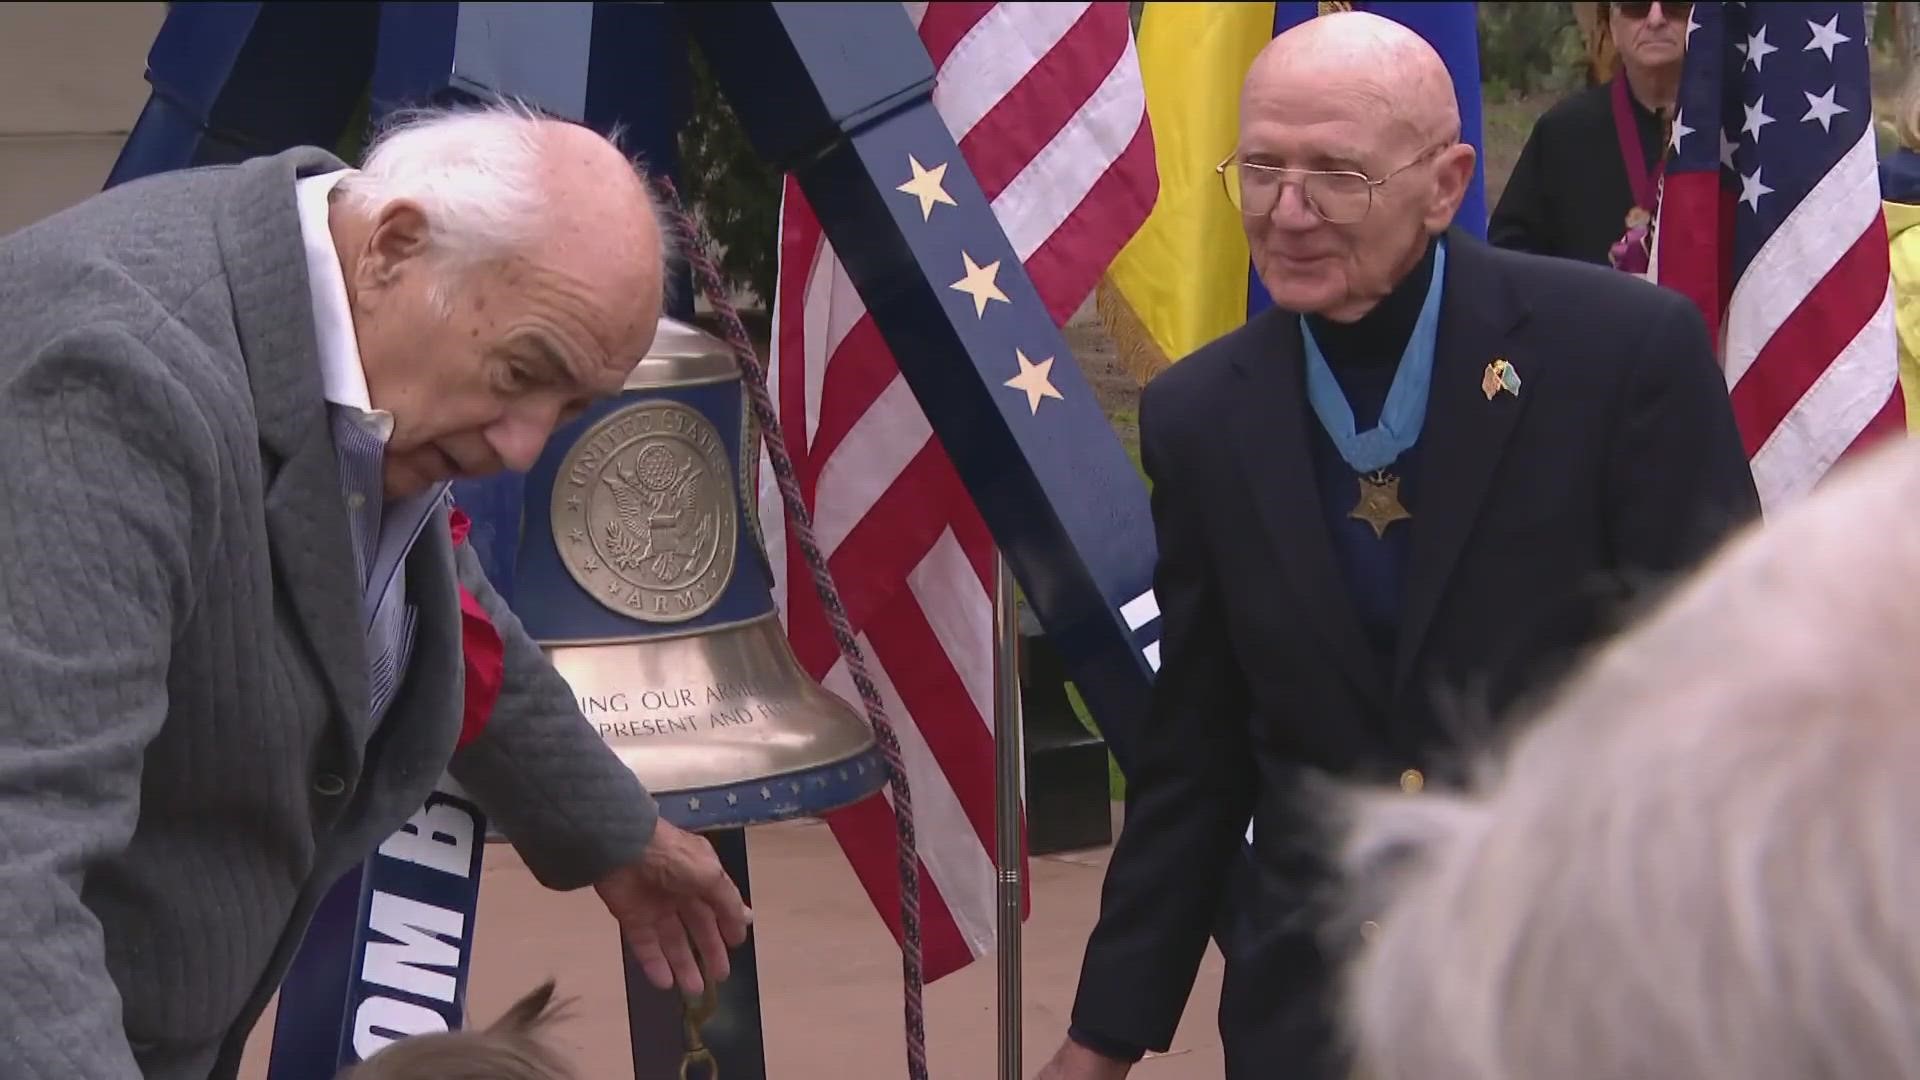 Medal of Honor recipient Robert Modrzejewski was one of many who rang America's Freedom Bell to show support and resolve Ukraine's fight for Freedom.